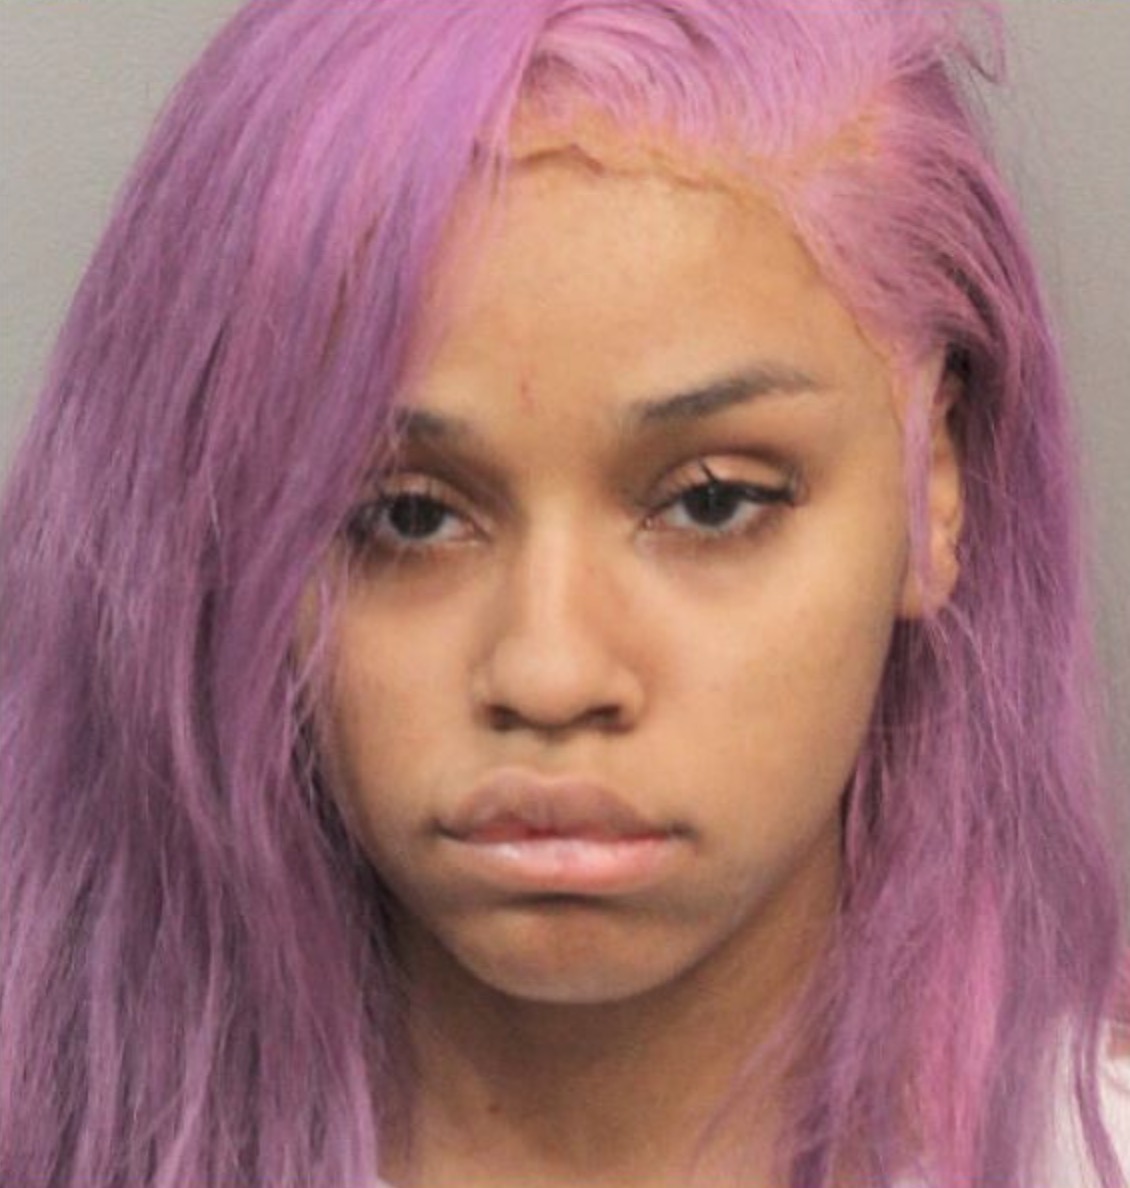 floyd-mayweather-s-daughter-accused-of-stabbing-woman-near-cypress